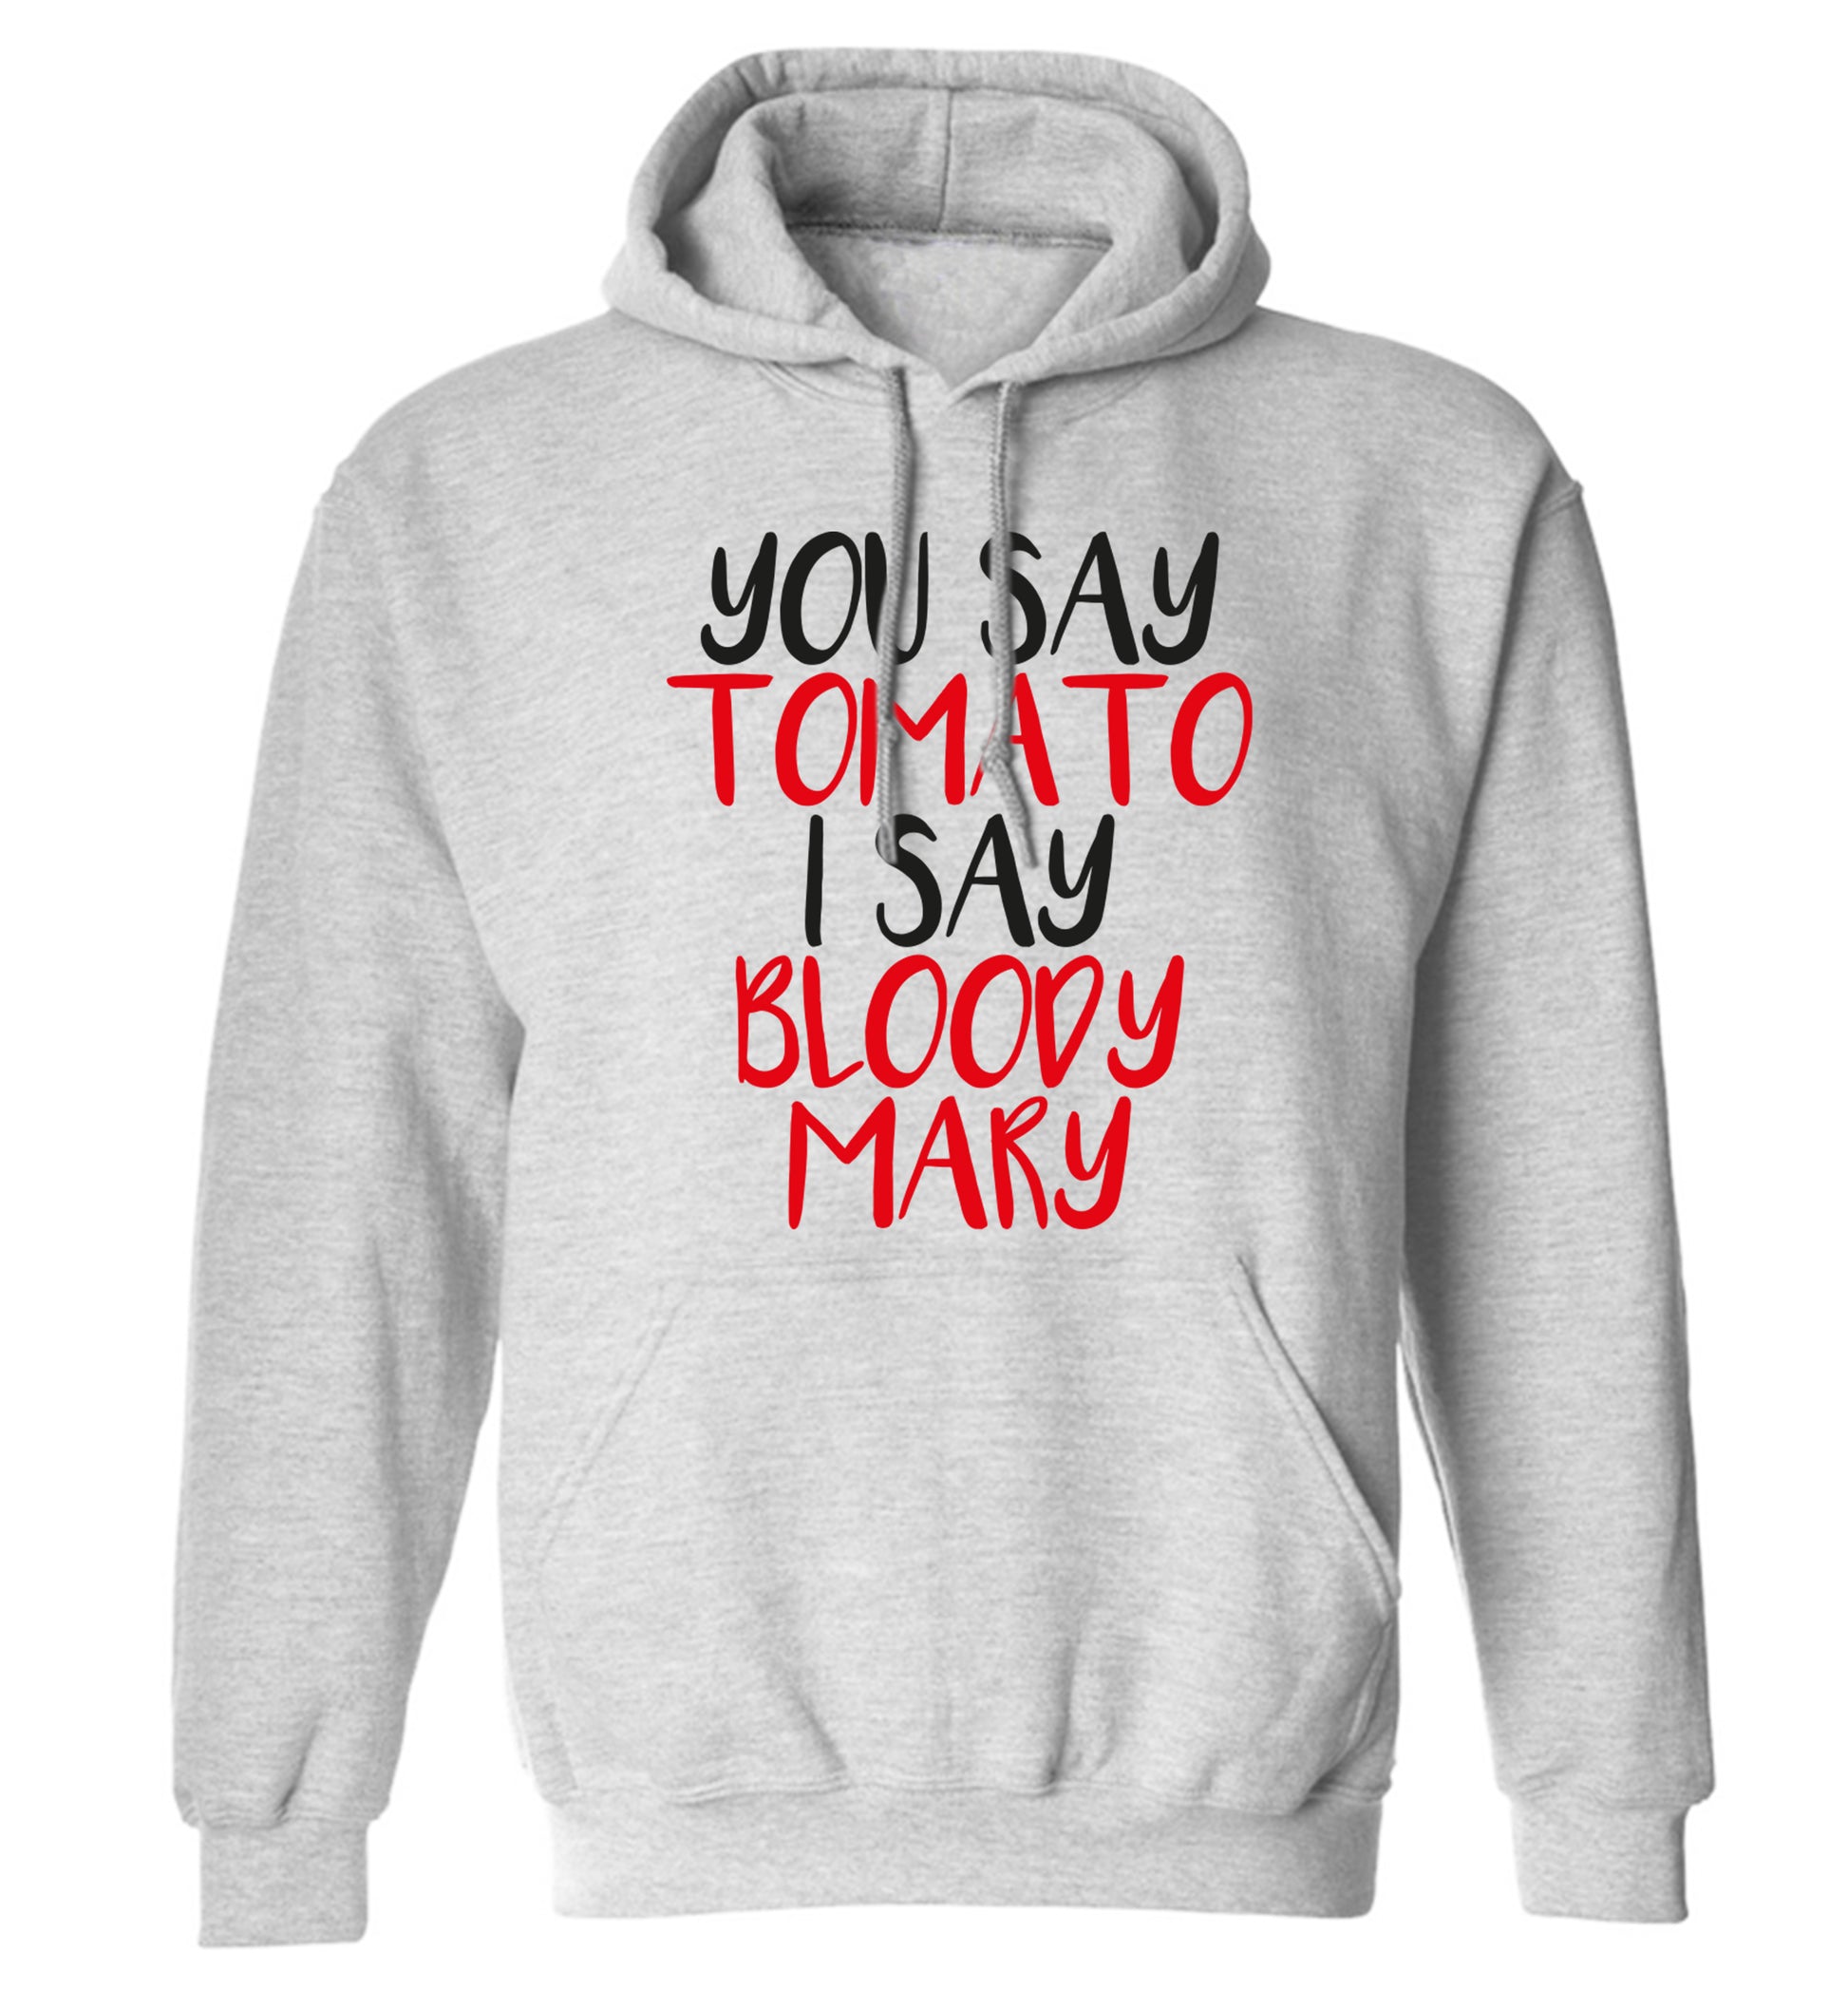 You say tomato I say bloody mary adults unisex grey hoodie 2XL